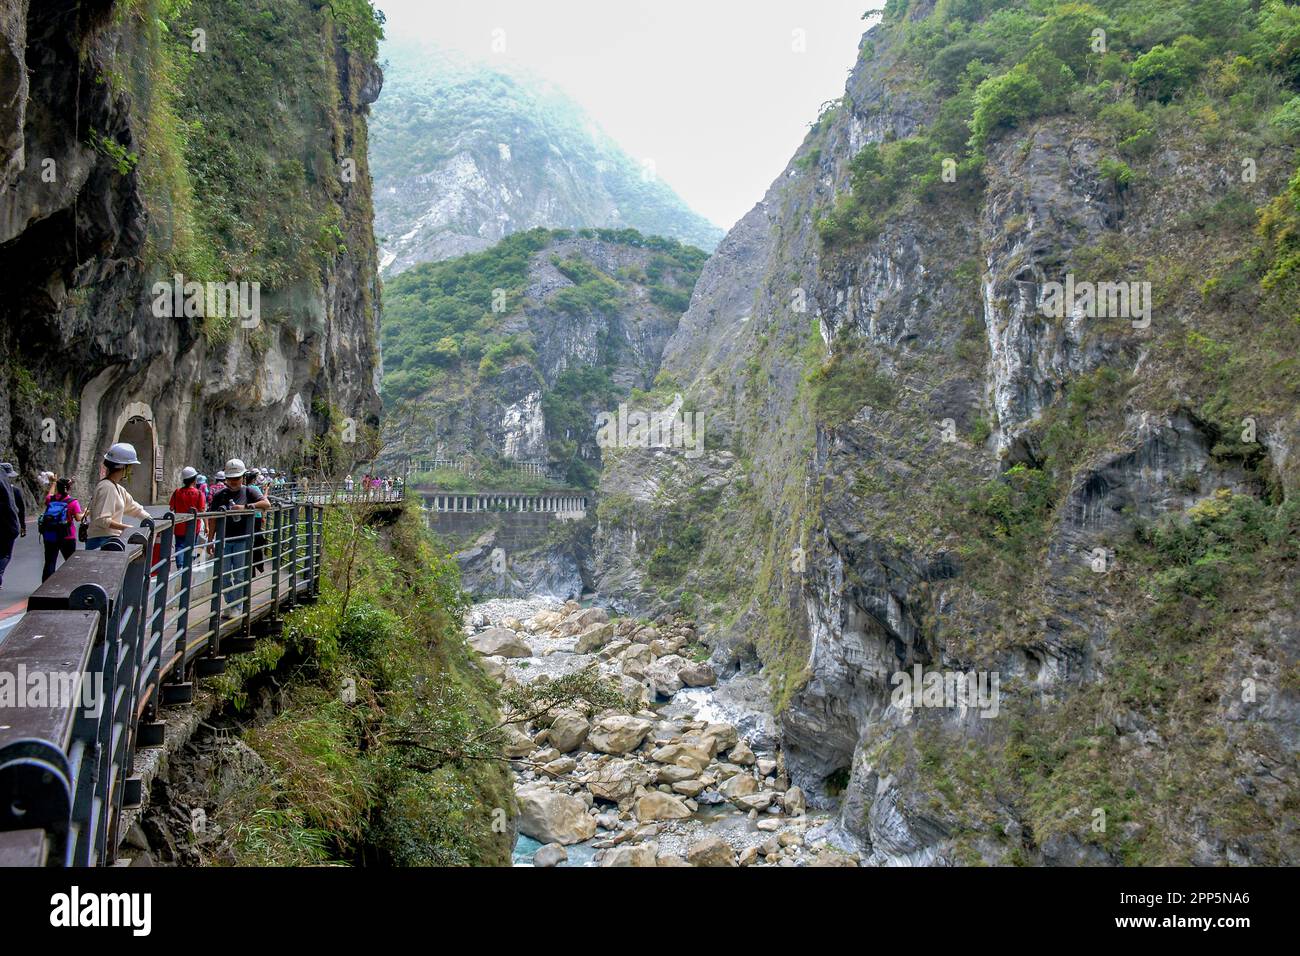 Swallow Grotto Yanzikou Trail with narrow turquoise Liwu River Gorge underneath and high mountain cliff face in Taroko National Park, Taiwan Stock Photo